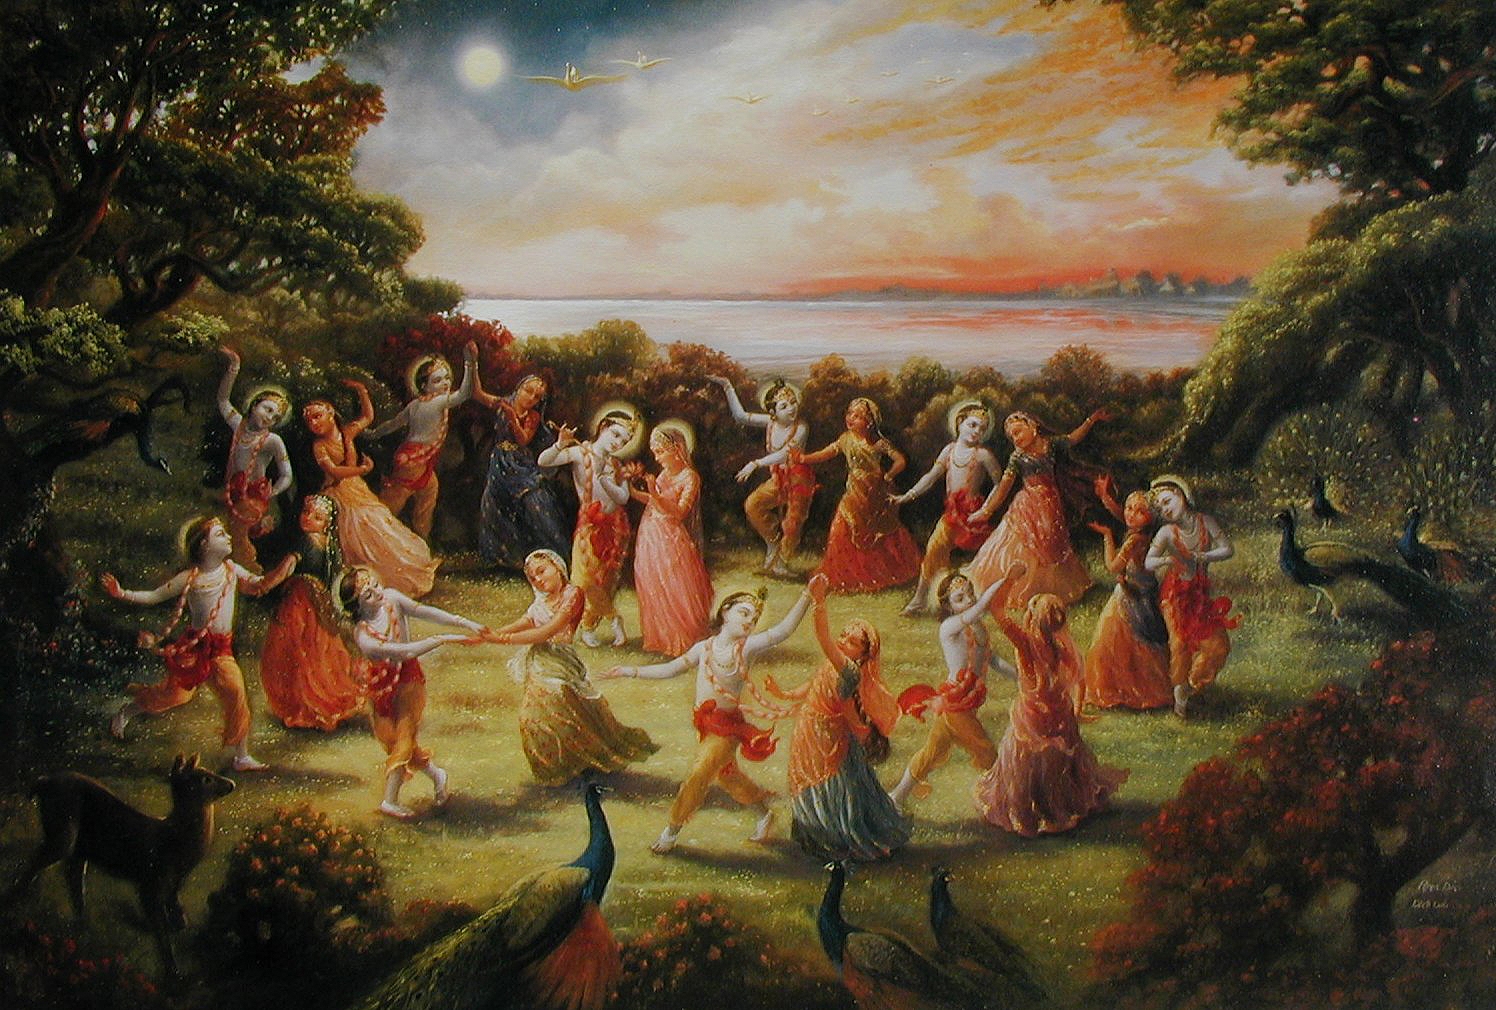 Krishnas was not an eight year old at the rasa dance picture